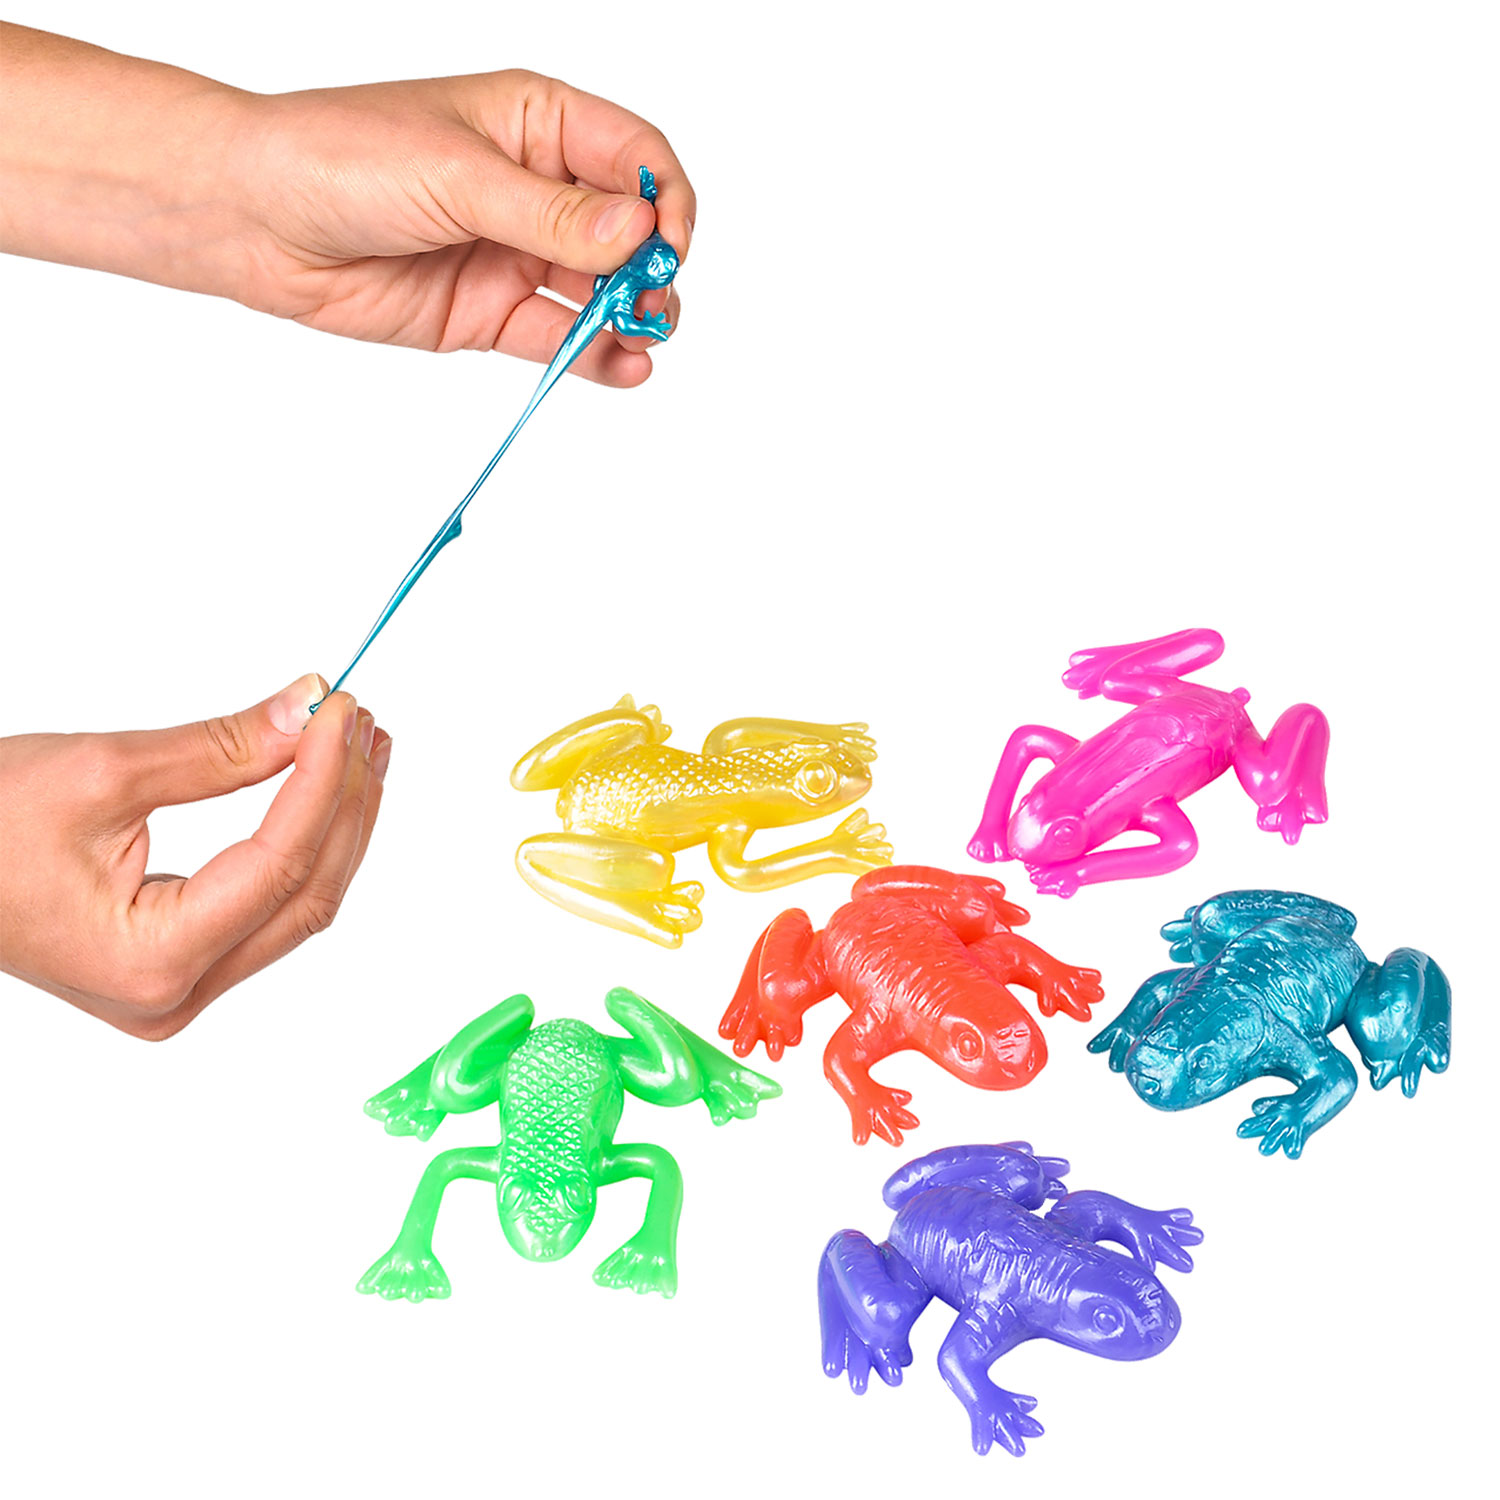 Stretchy Rubber Frogs Action Figure Lot of 12 